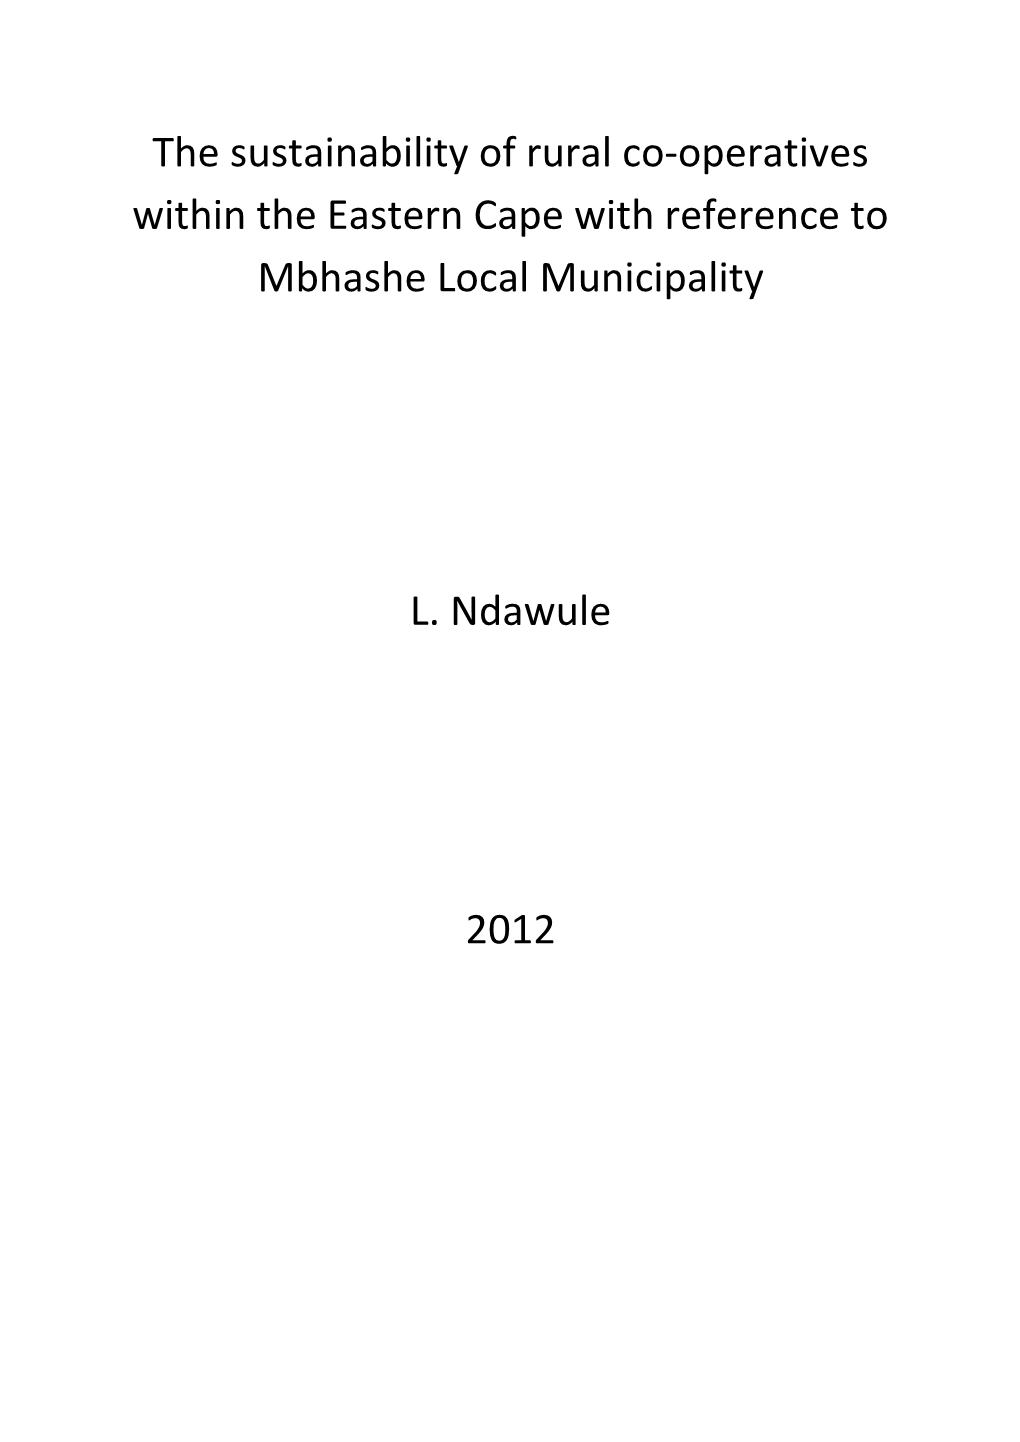 The Sustainability of Rural Co-Operatives Within the Eastern Cape with Reference to Mbhashe Local Municipality